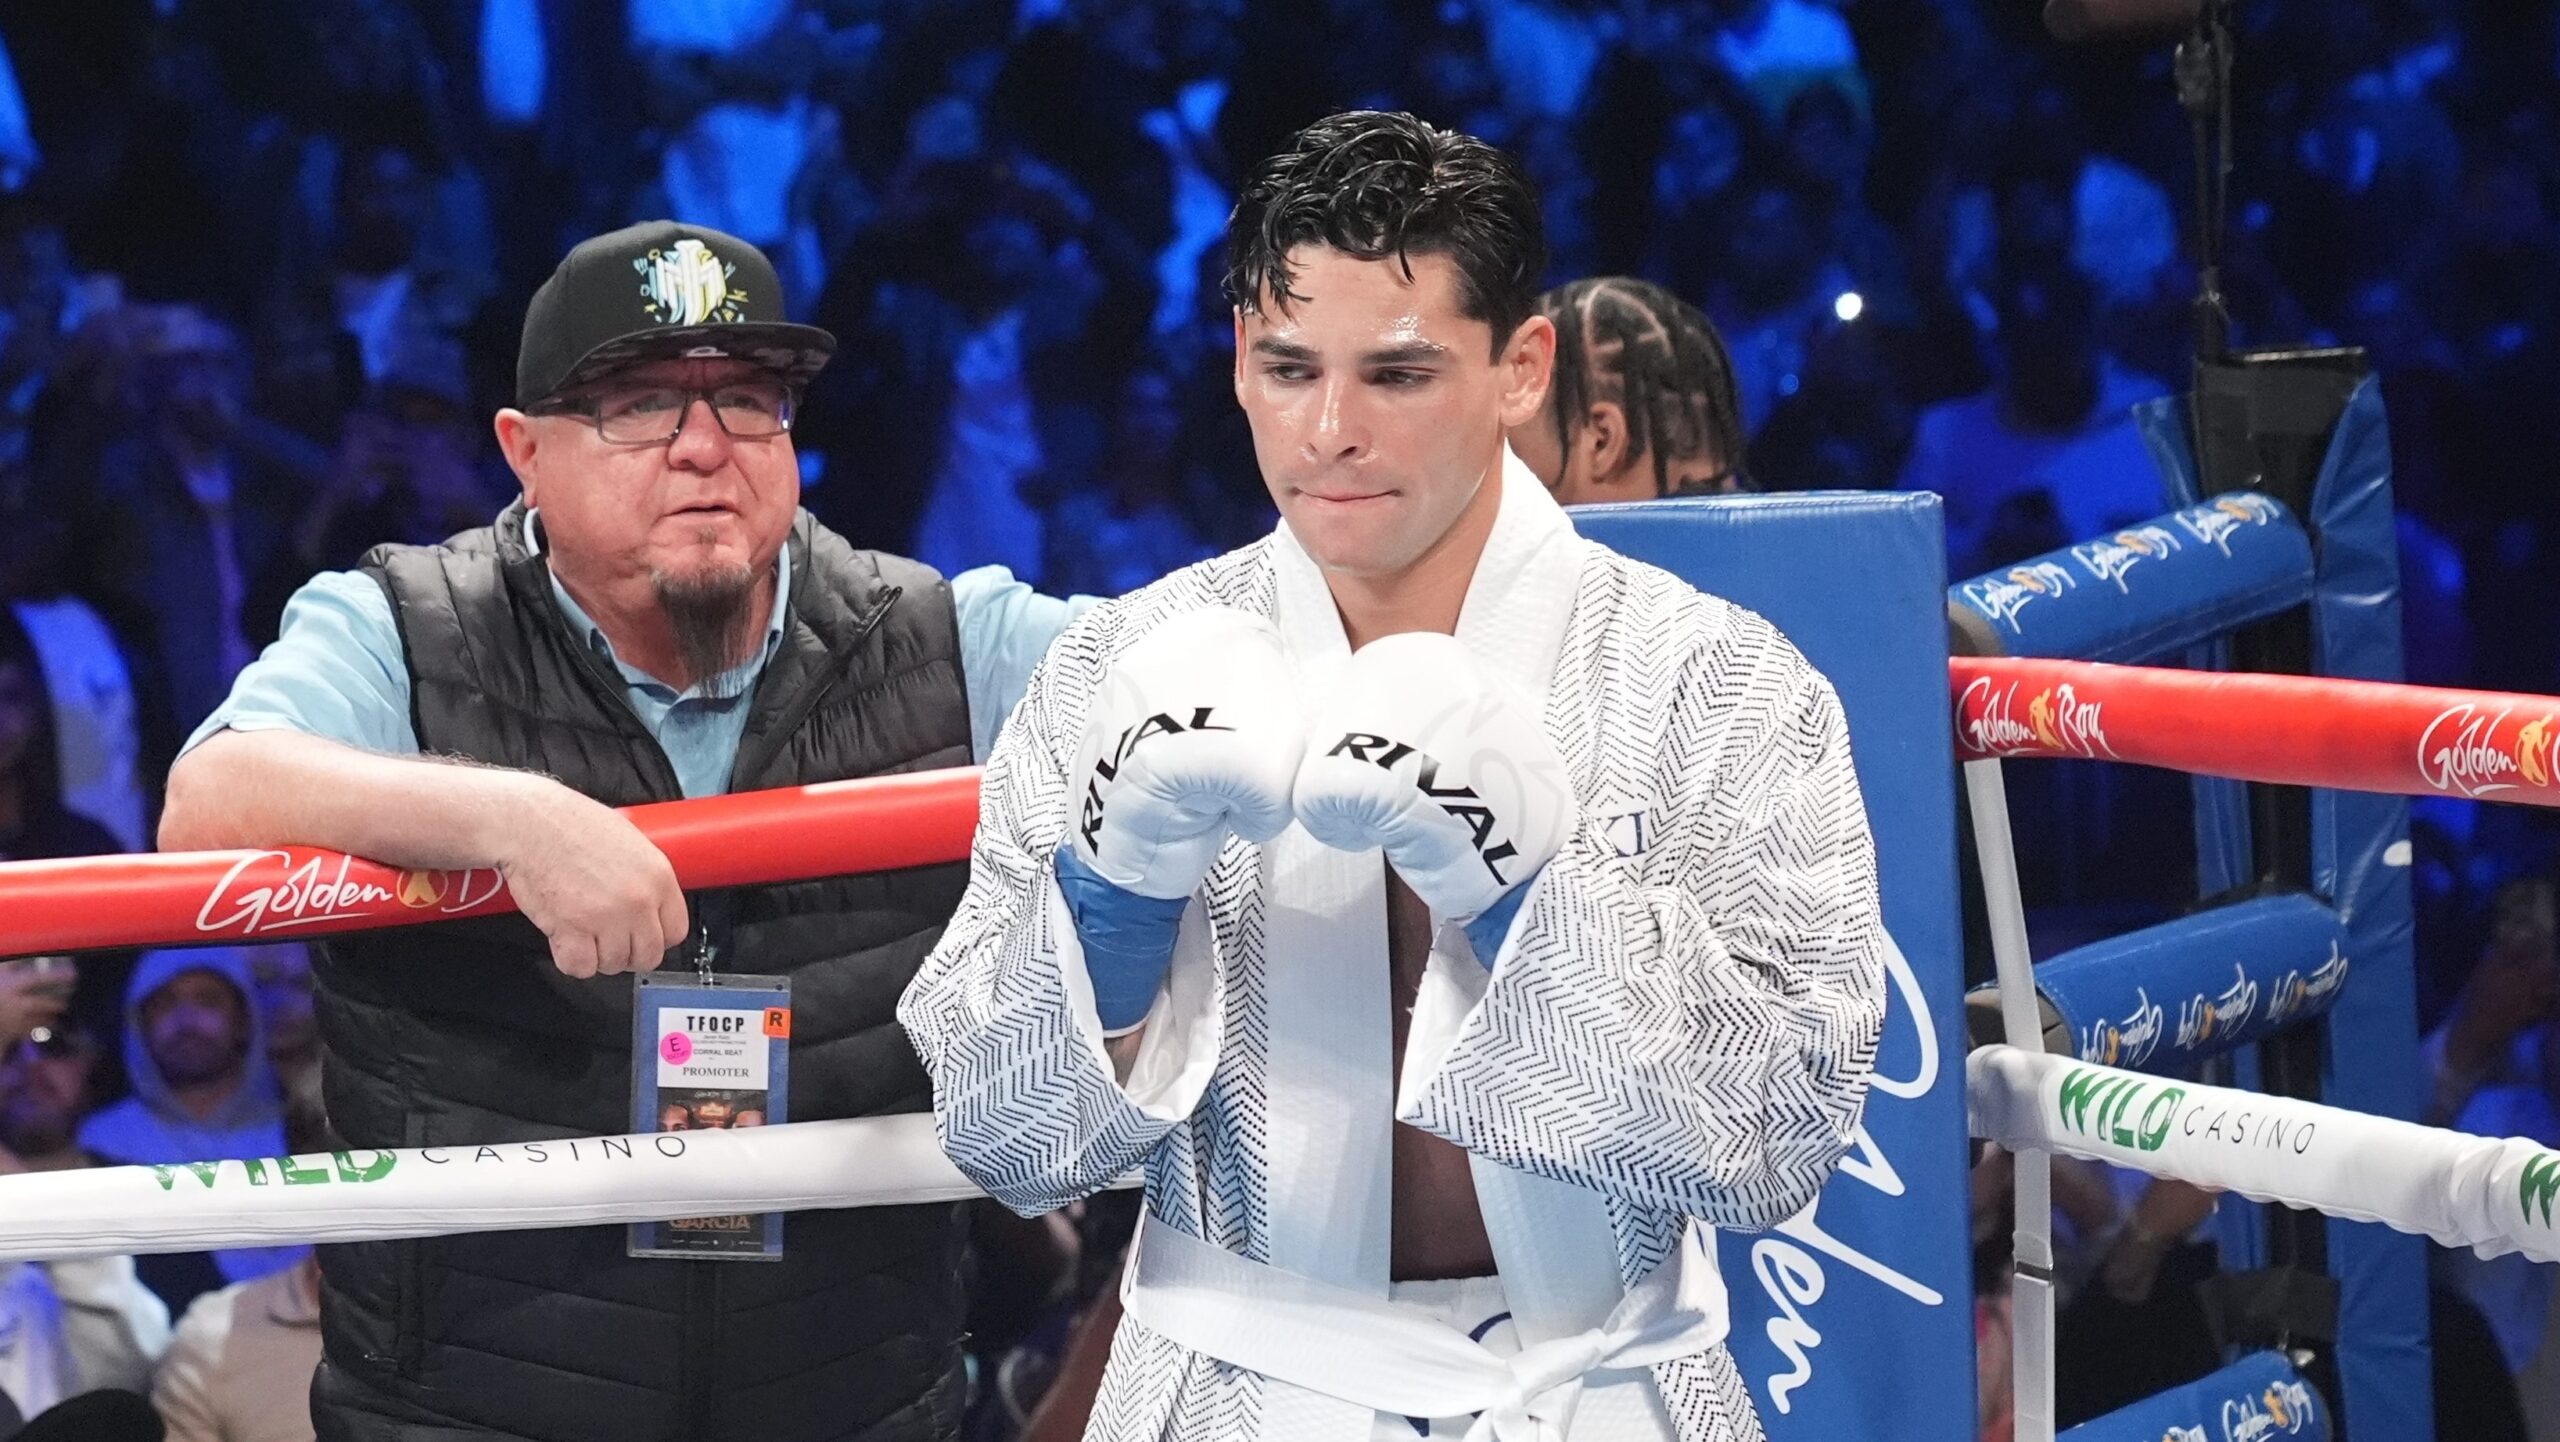 ryan-garcia-requested-that-his-b-sample-be-analyzed-in-case-of-doping,-according-to-espn